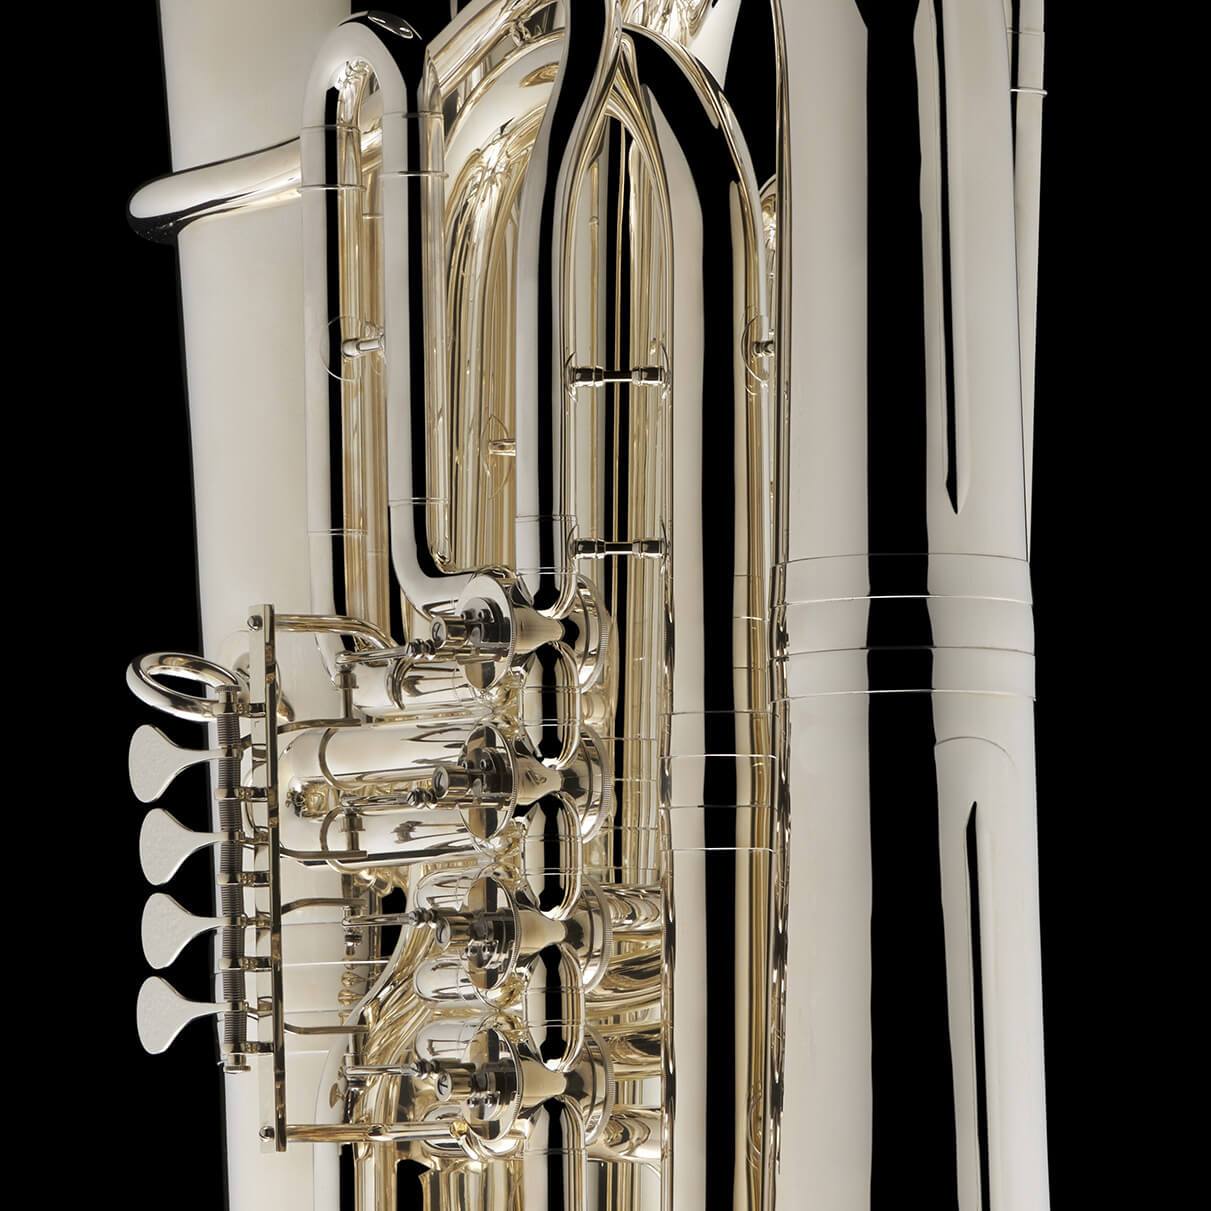 A close up image of the rotary valves of a BBb 6/4 Rotary tuba ‘Kaiser’ from Wessex Tubas